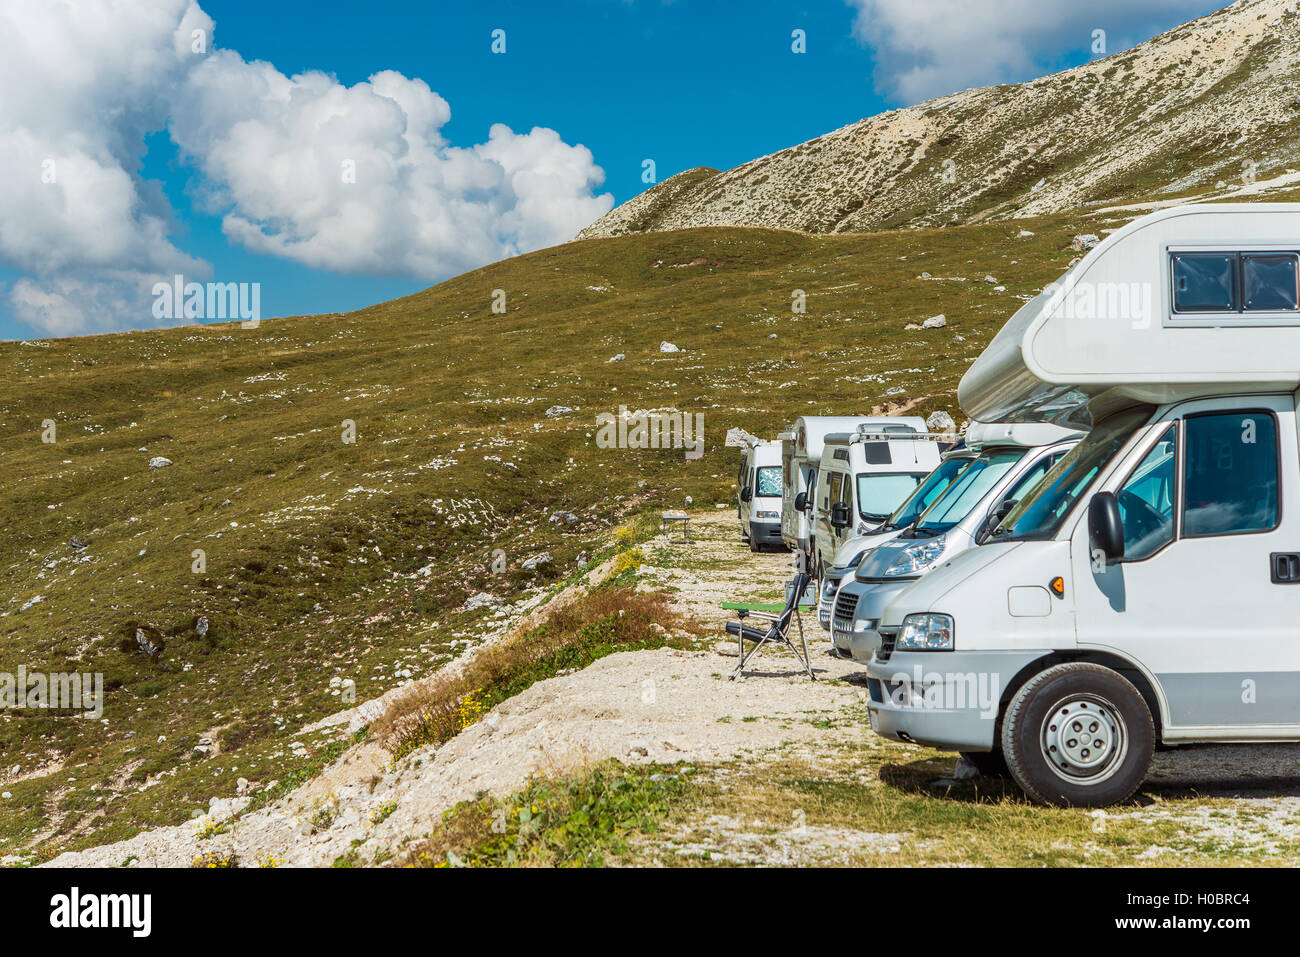 RV Motorhomes Camping in High Alpine Place. Scenic Campers Campground. Stock Photo